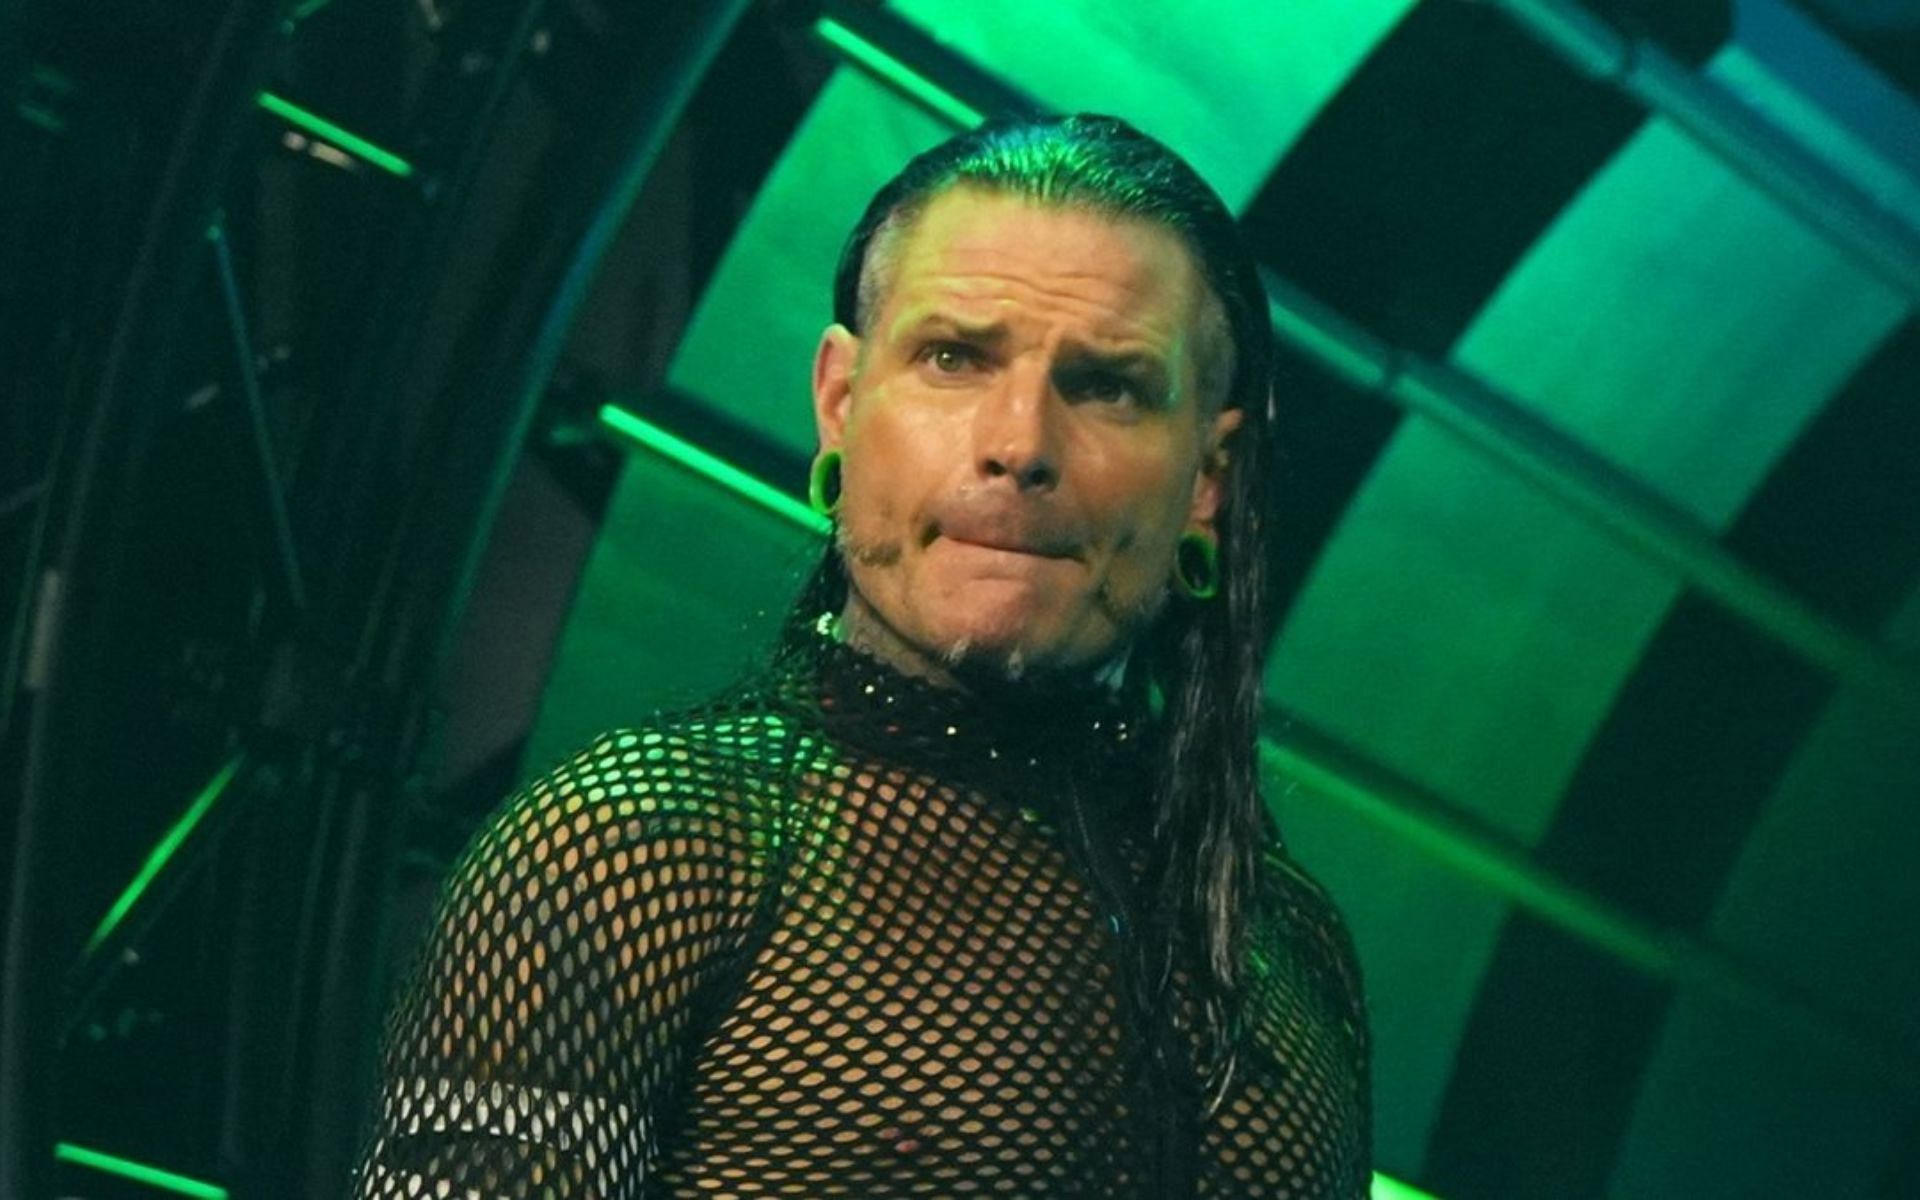 AEW star Jeff Hardy was recently involved in a DUI-related arrest.